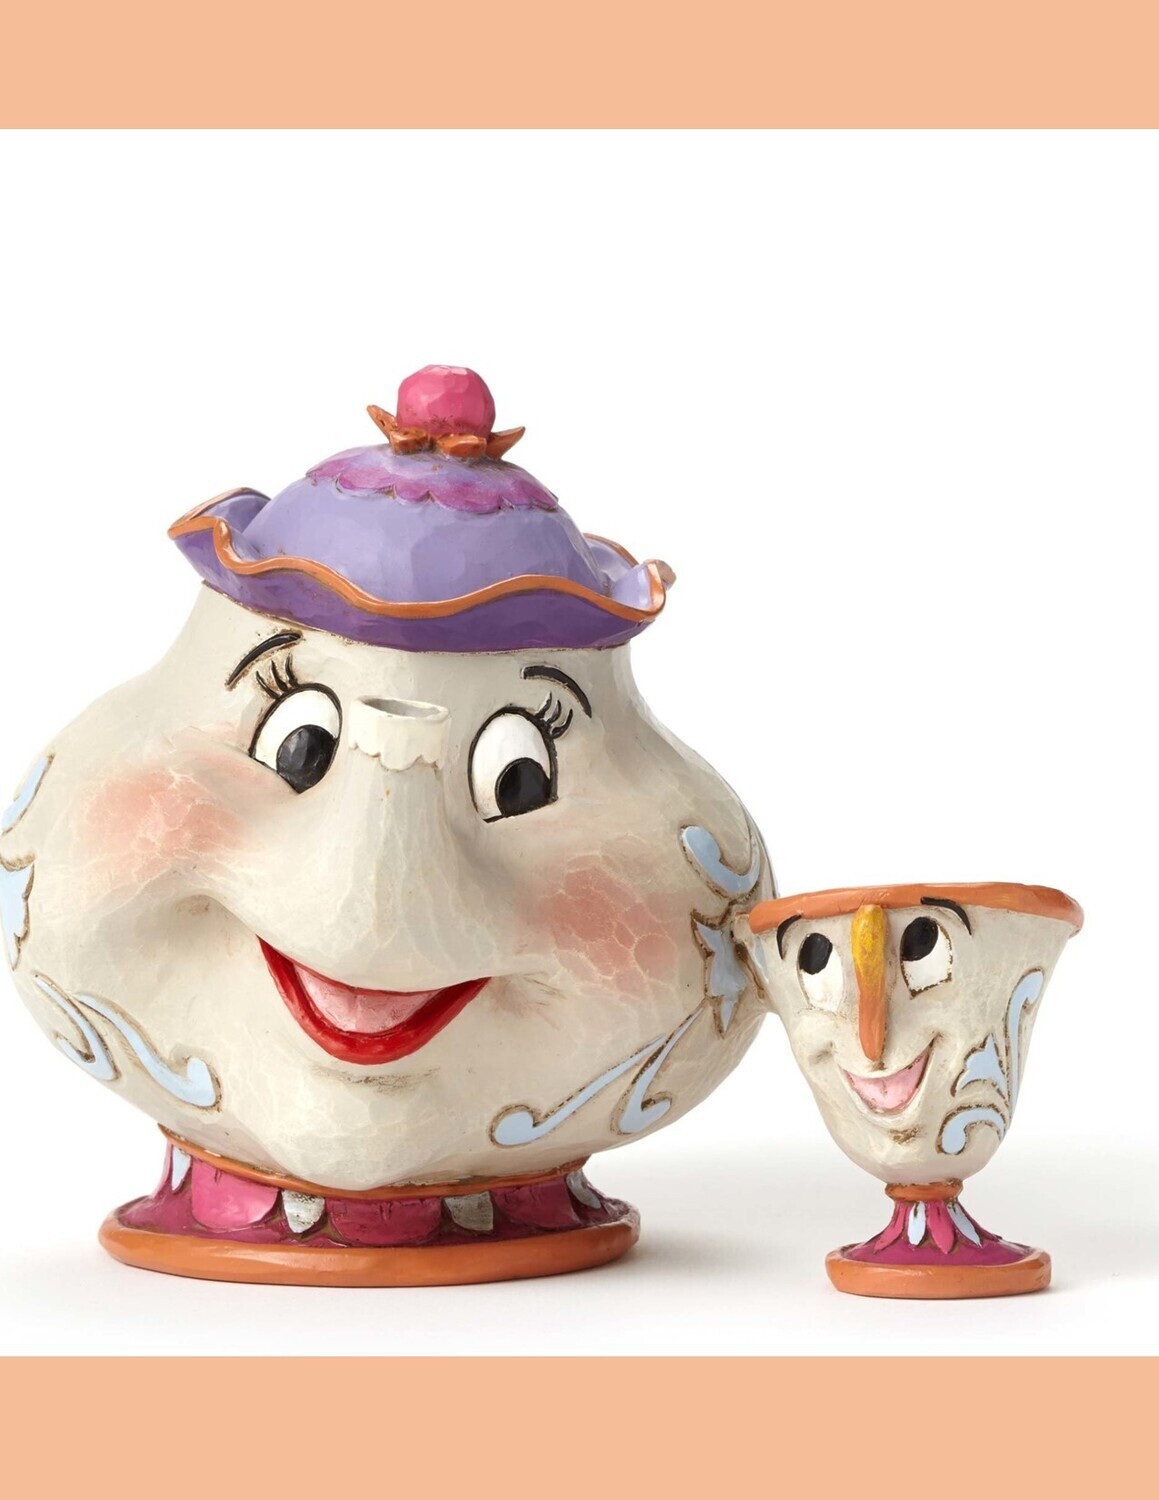 Jim Shore Disney Traditions "Mrs. Potts & Chip" Beauty and the Beast (4049622)